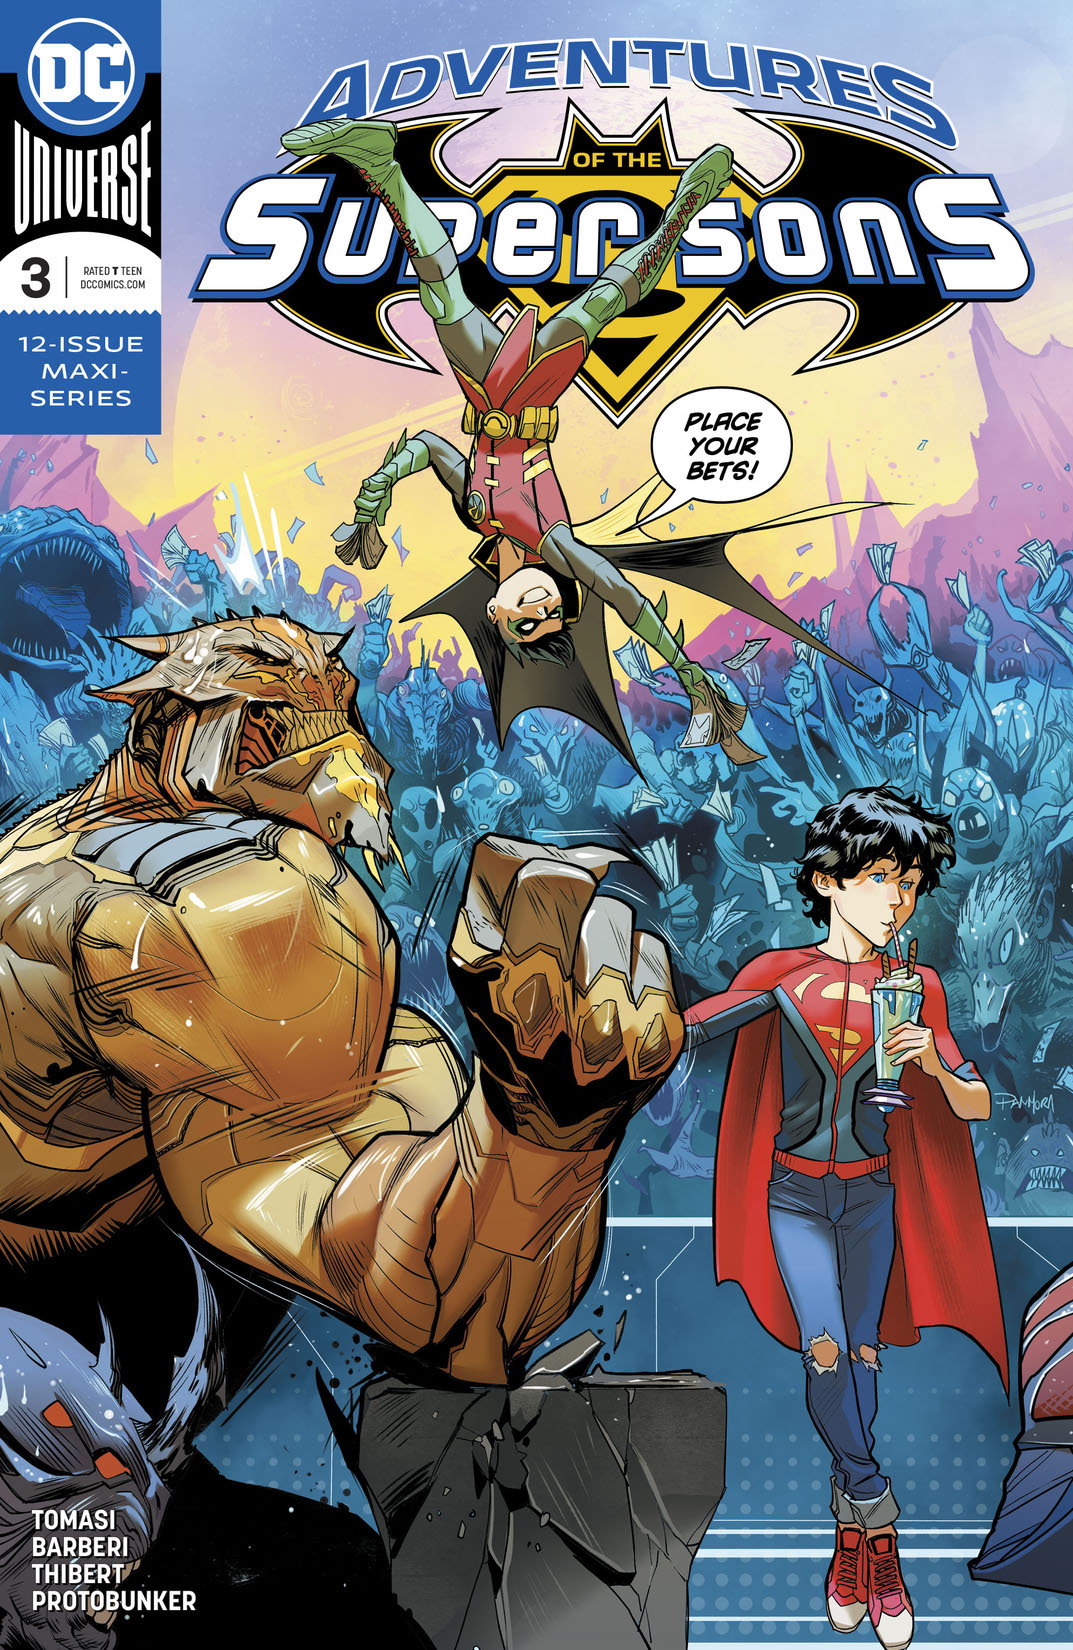 Adventures of the Super Sons #3 preview images